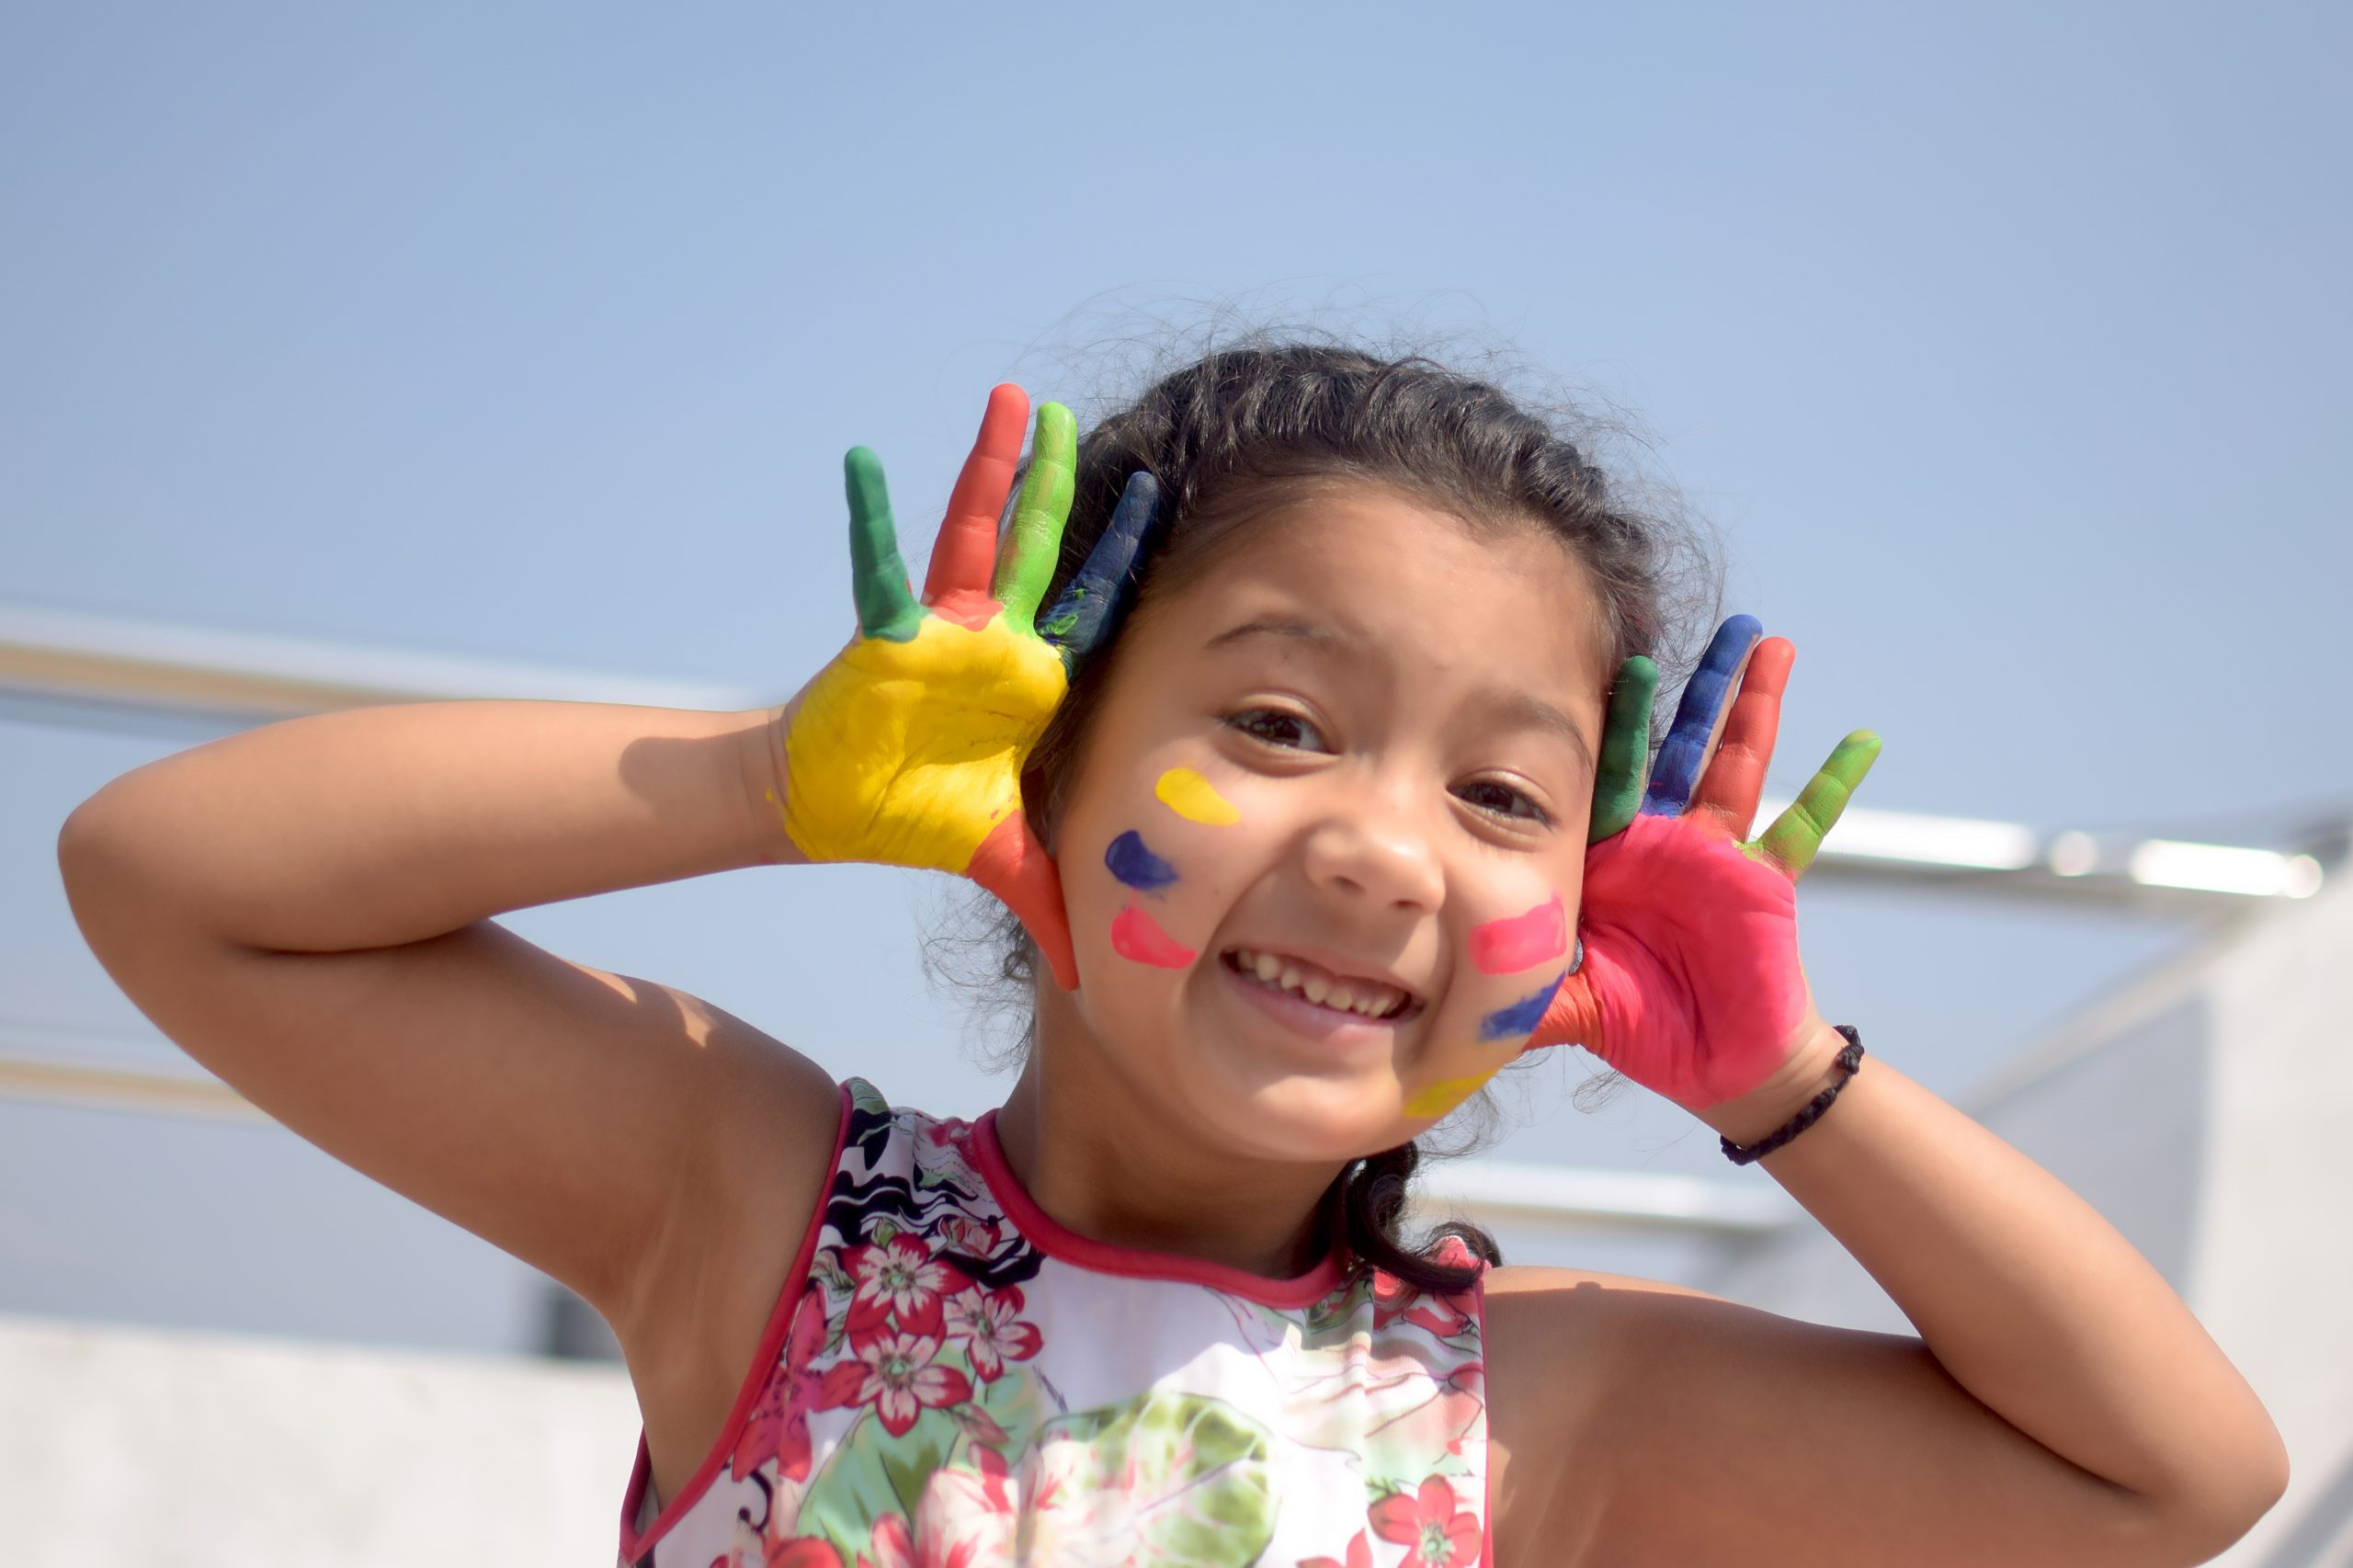 A child from Nepal. She is holding her hands up by her face. Her hands are painted pink, yellow, green, and blue.